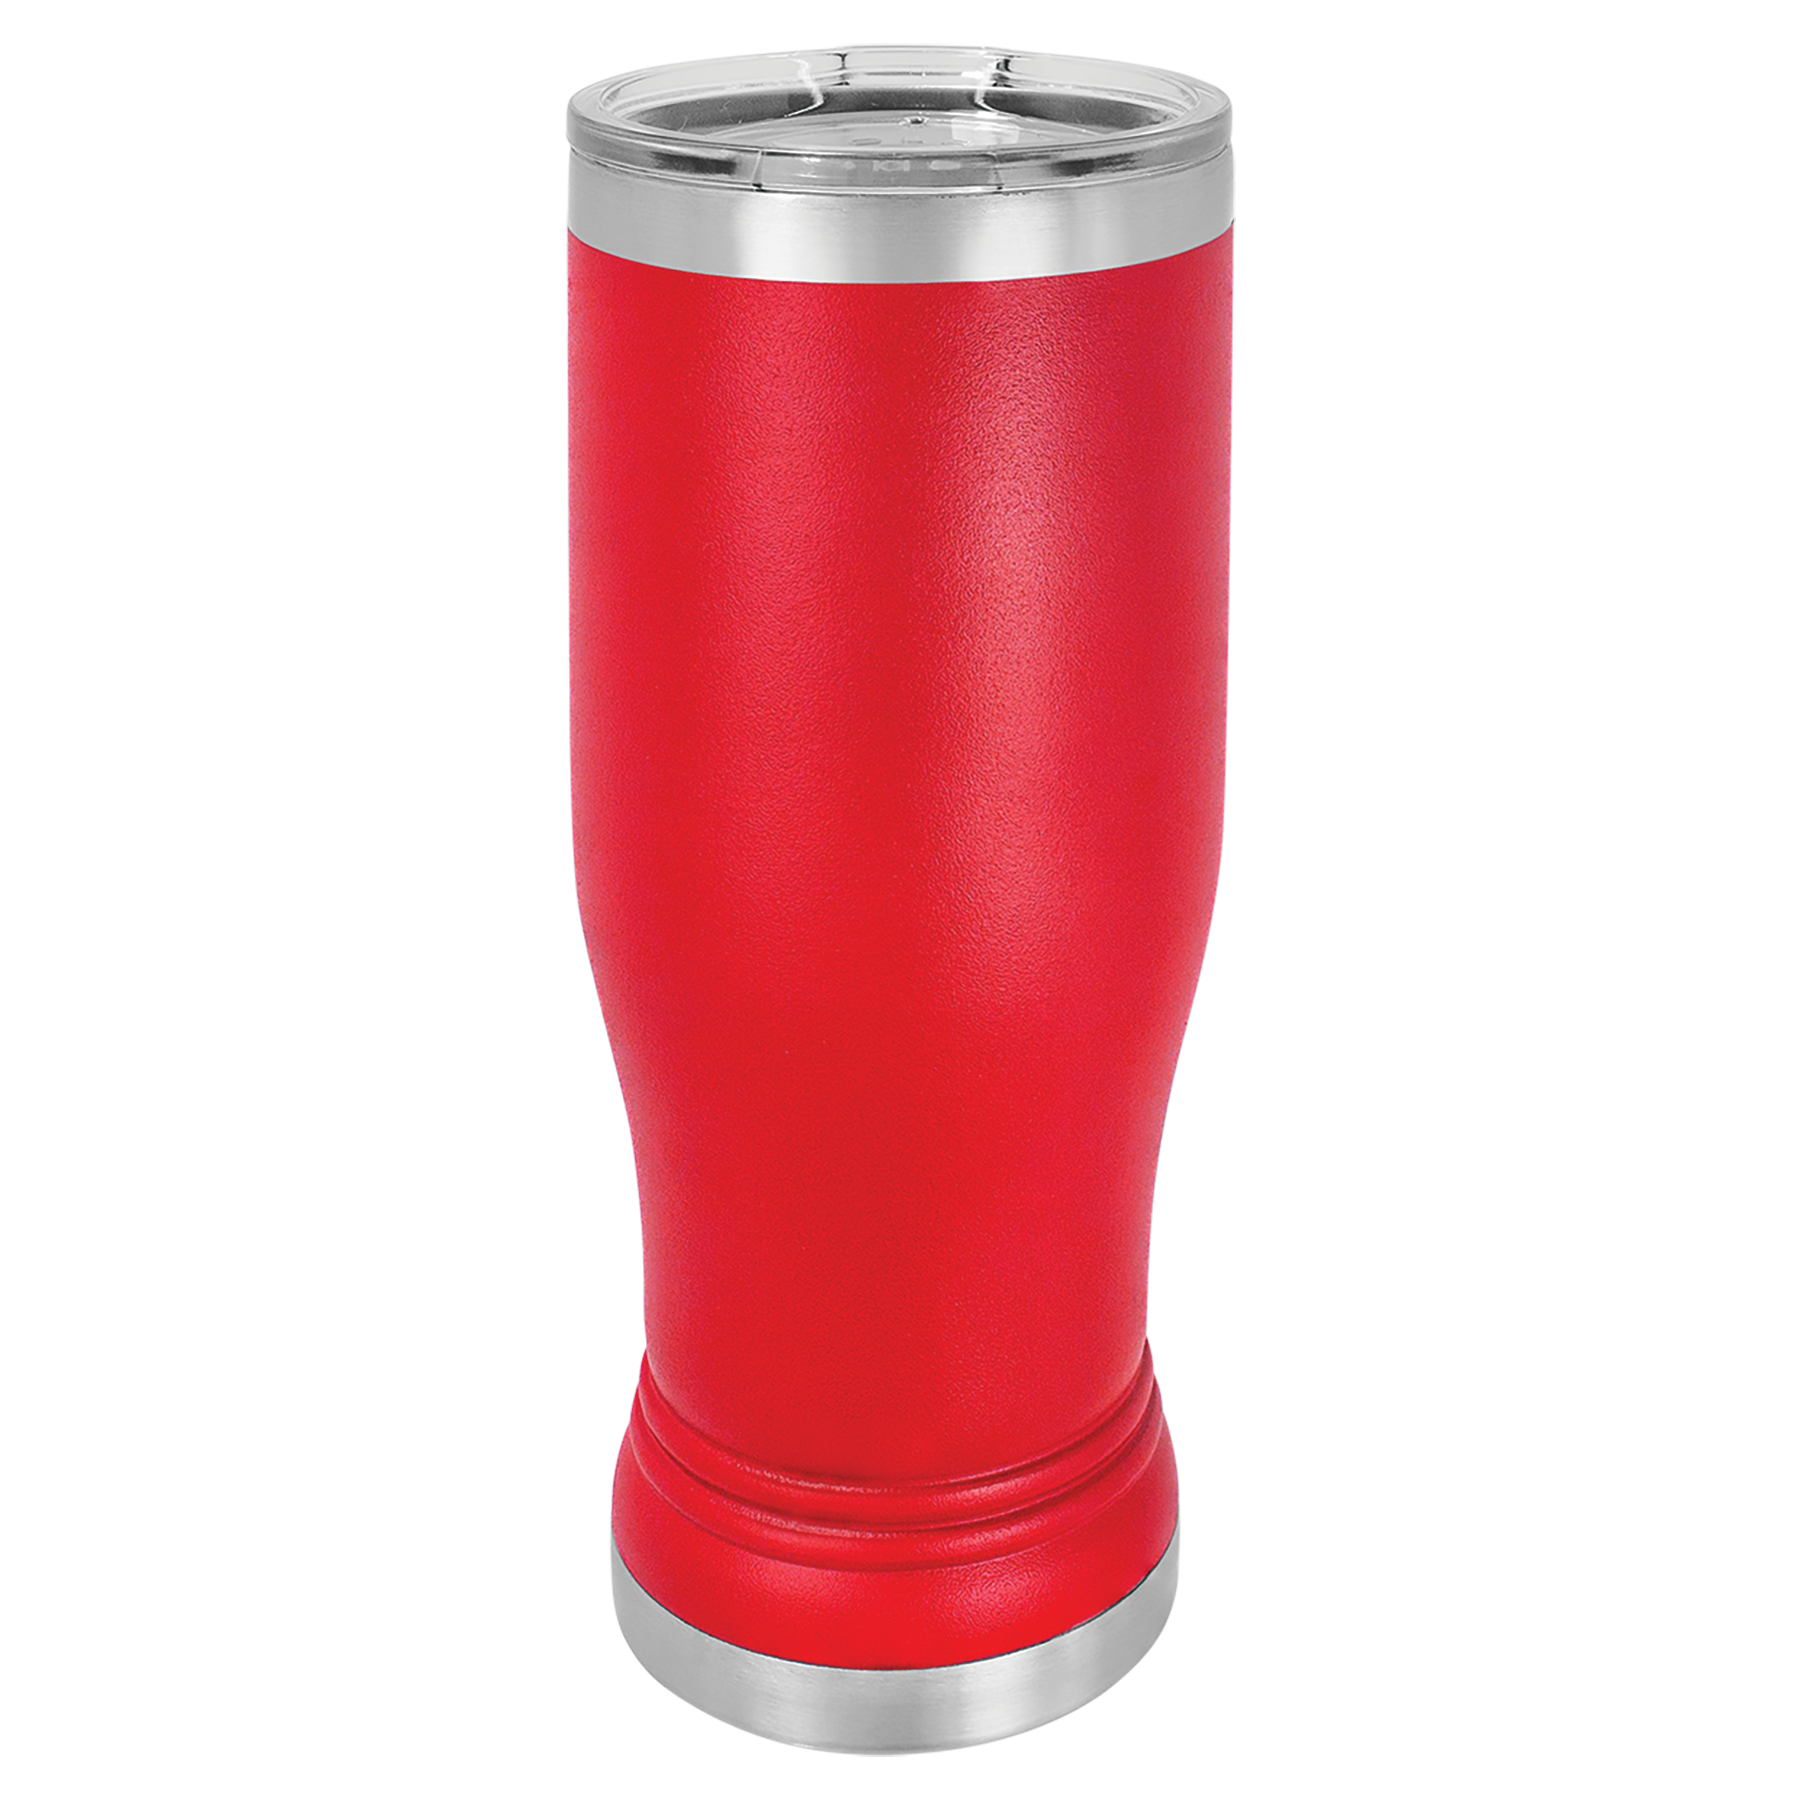 Red 14oz Pilsner Tumbler -One Free Engraving  -Fits most Cup Holders  -Double-wall Vacuum Insulated  -Made from 18/8 Gauge Stainless Steel (Type 304 Food Grade)  -Lid is BPA Free (Hand Wash Only)  -Not recommended for Dishwasher  -Works with Cold and Hot Drinks  -17 Color Options  -Perfect for Personalized Gifts, Awards, Incentives, Swag & Fundraisers